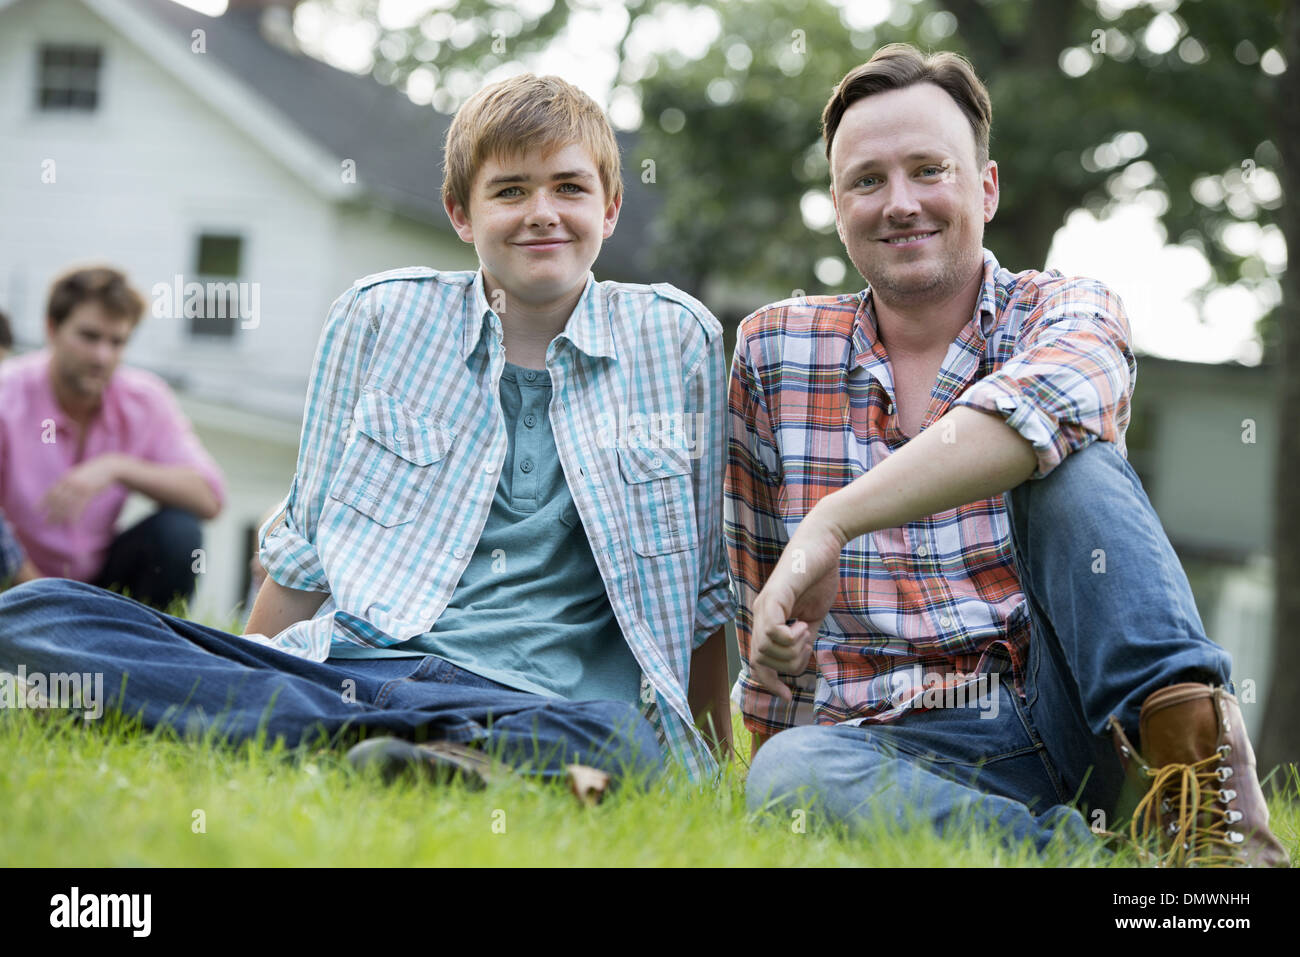 A father and son at a summer party sitting on  grass. Stock Photo